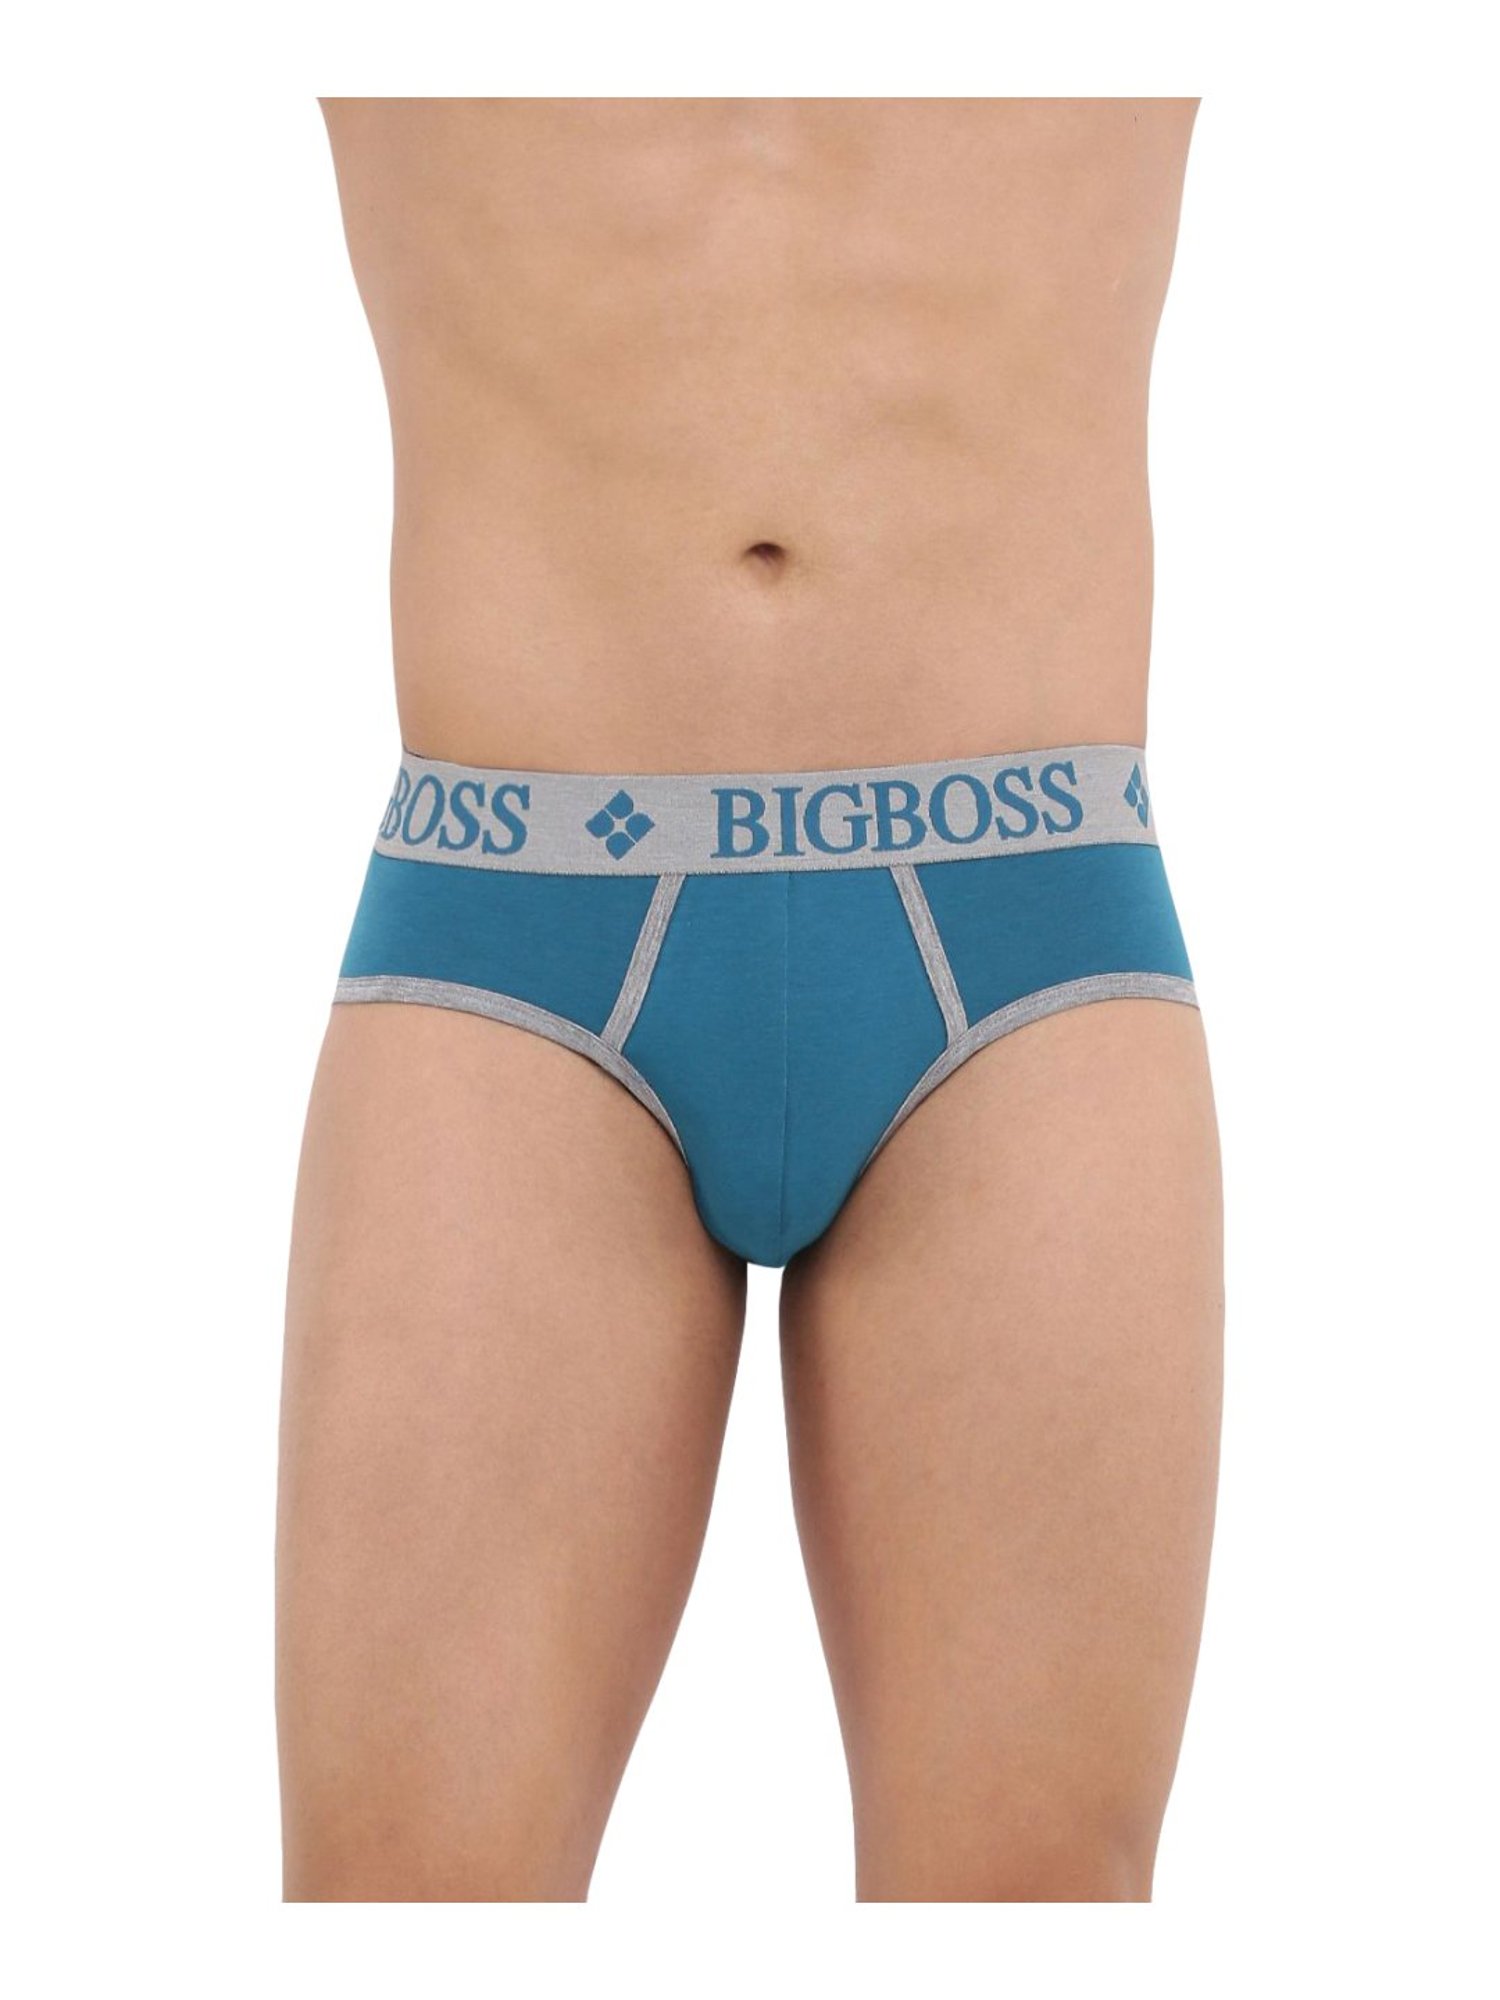 Buy Dollar Bigboss Assorted Color Cotton Briefs (Pack Of 3) for